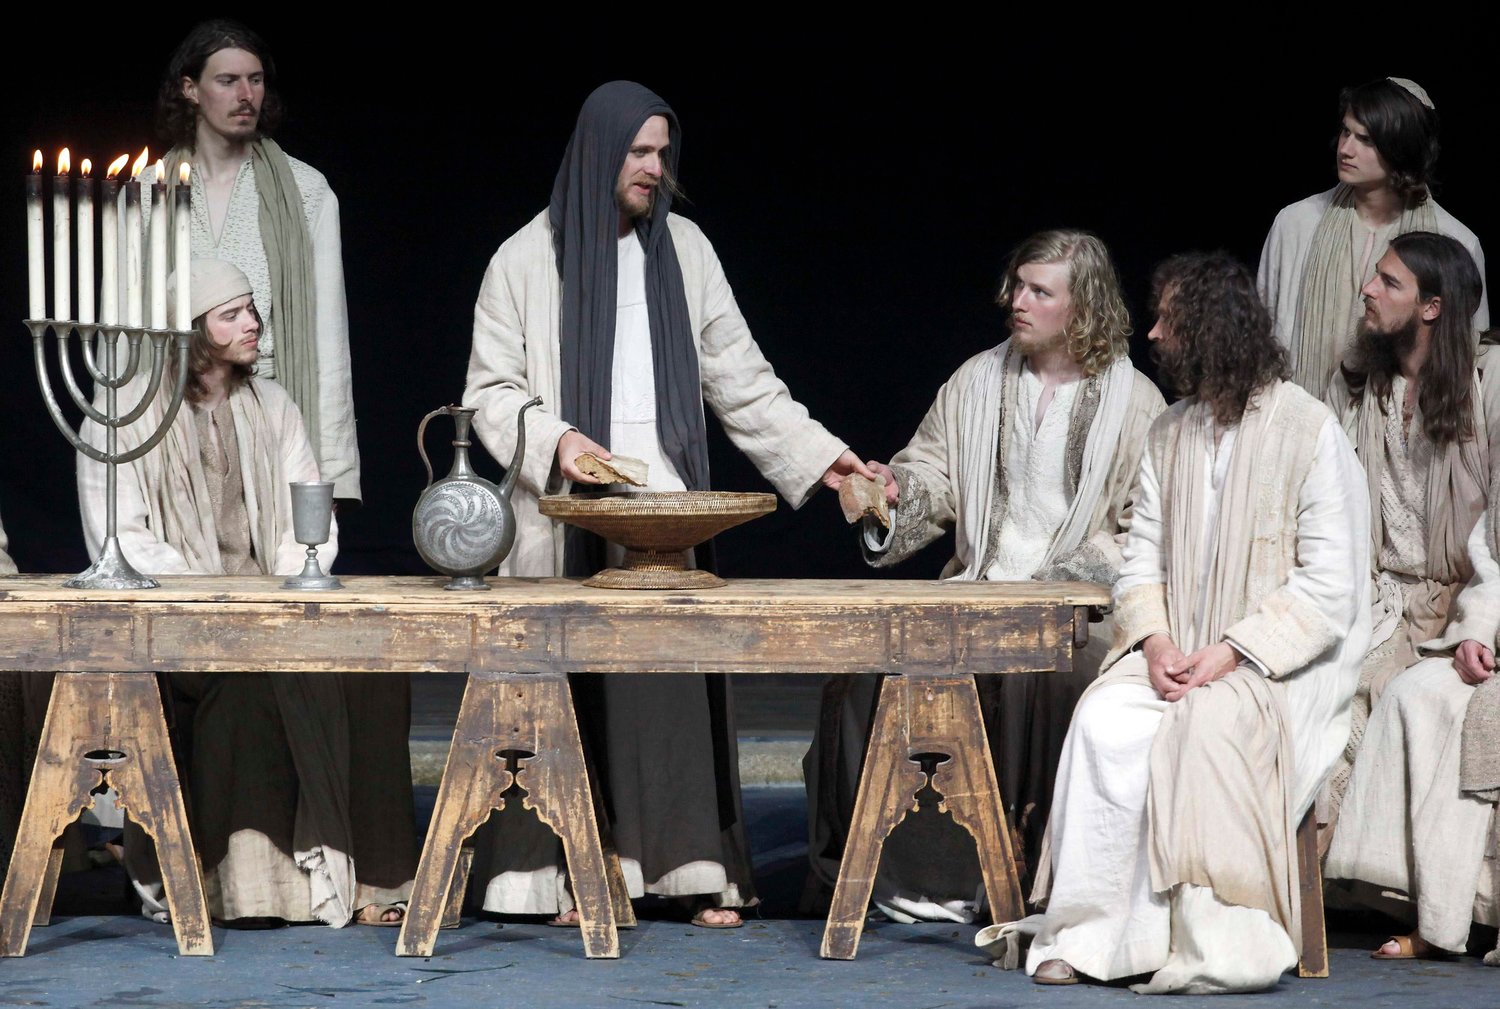 Frederik Mayet, third from left, portrays Jesus Christ at the Last Supper during a 2010 rehearsal of the famous Passion Play in Oberammergau, Germany. The village has put on the play roughly every 10 years since 1634, fulfilling a promise made by villagers when they were saved from the plague.